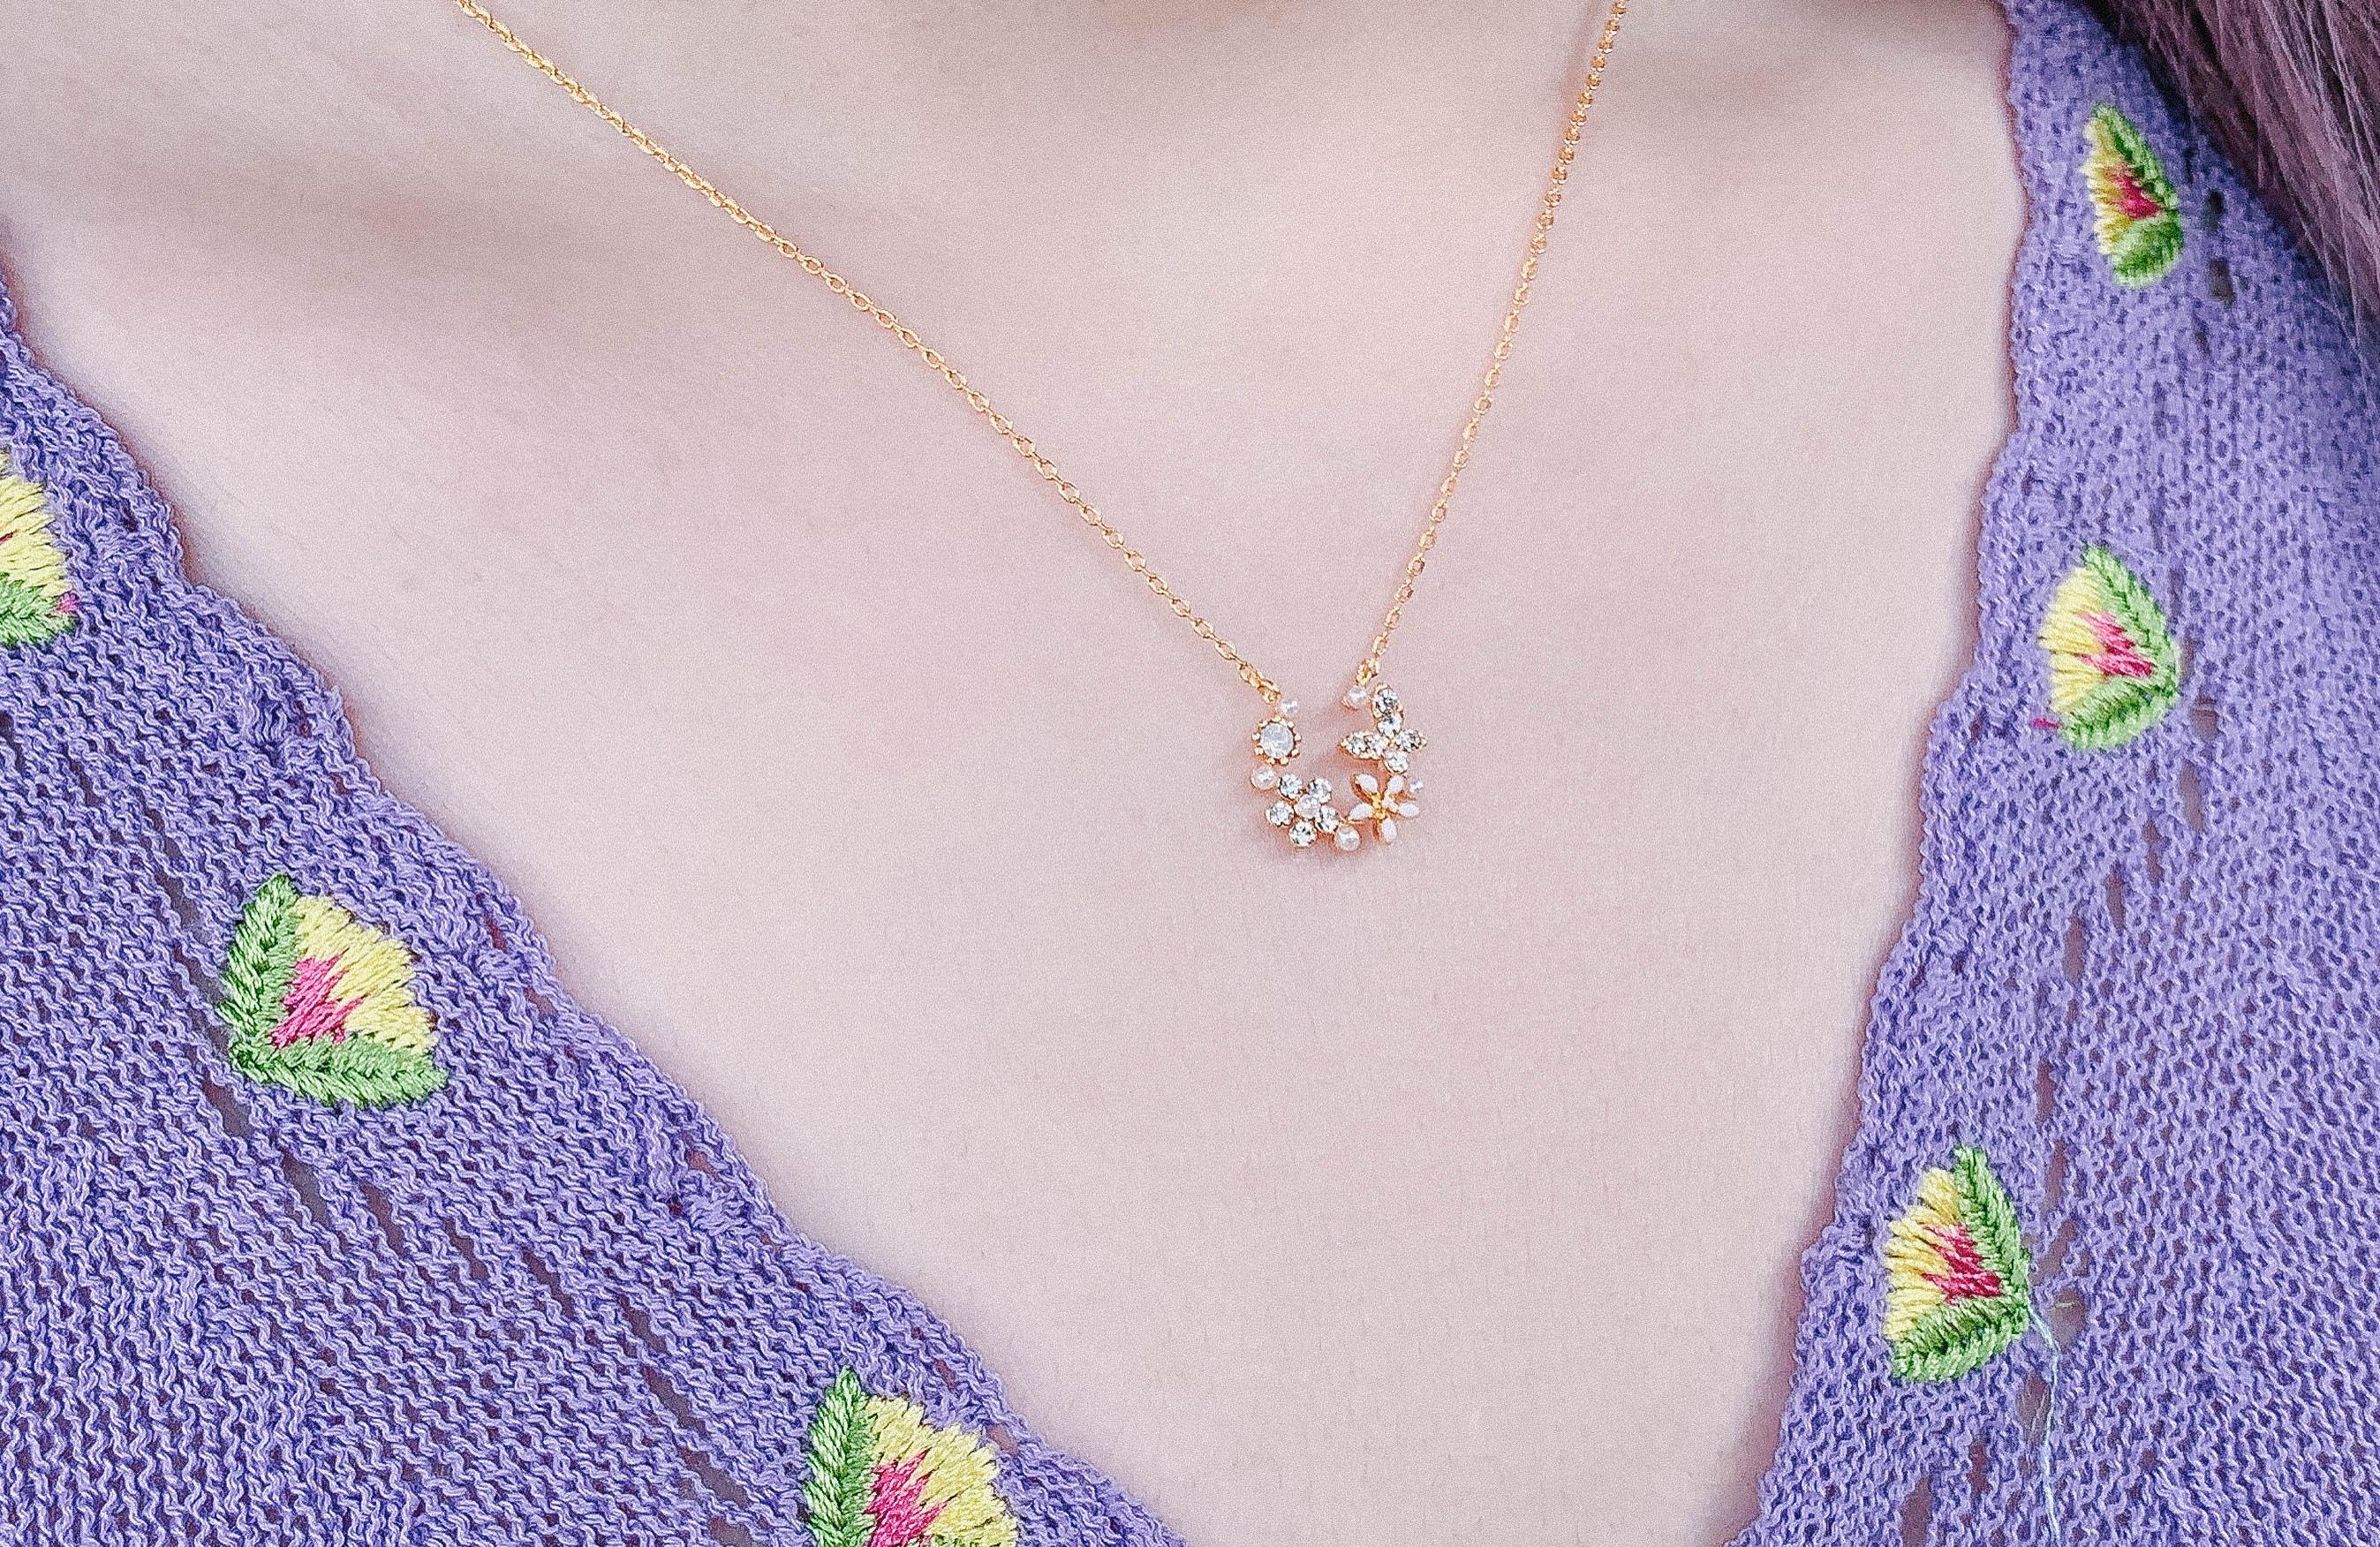 November ネックレス necklace anything else 